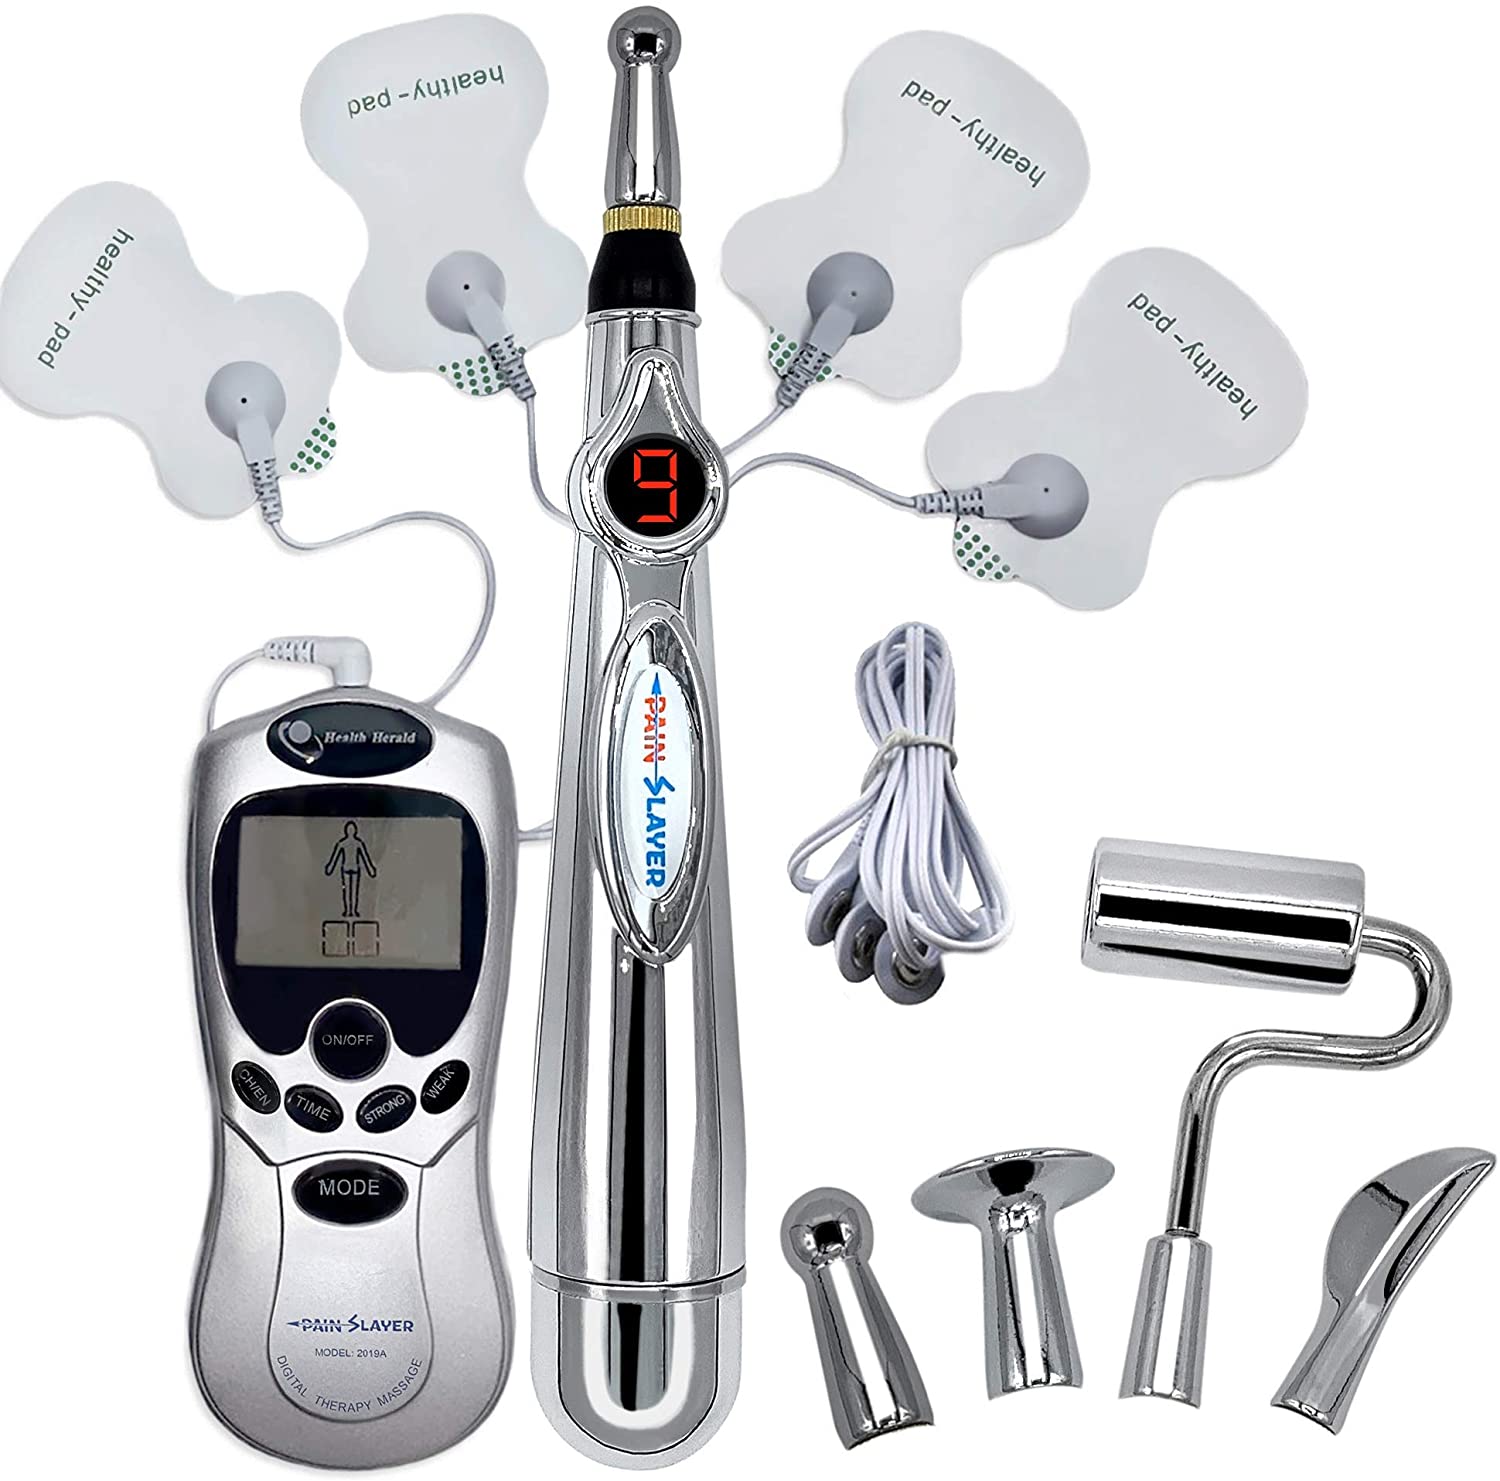 PAIN SLAYER Plus Energy Relief Electric Therapy Machine Acupuncture Massage Pen